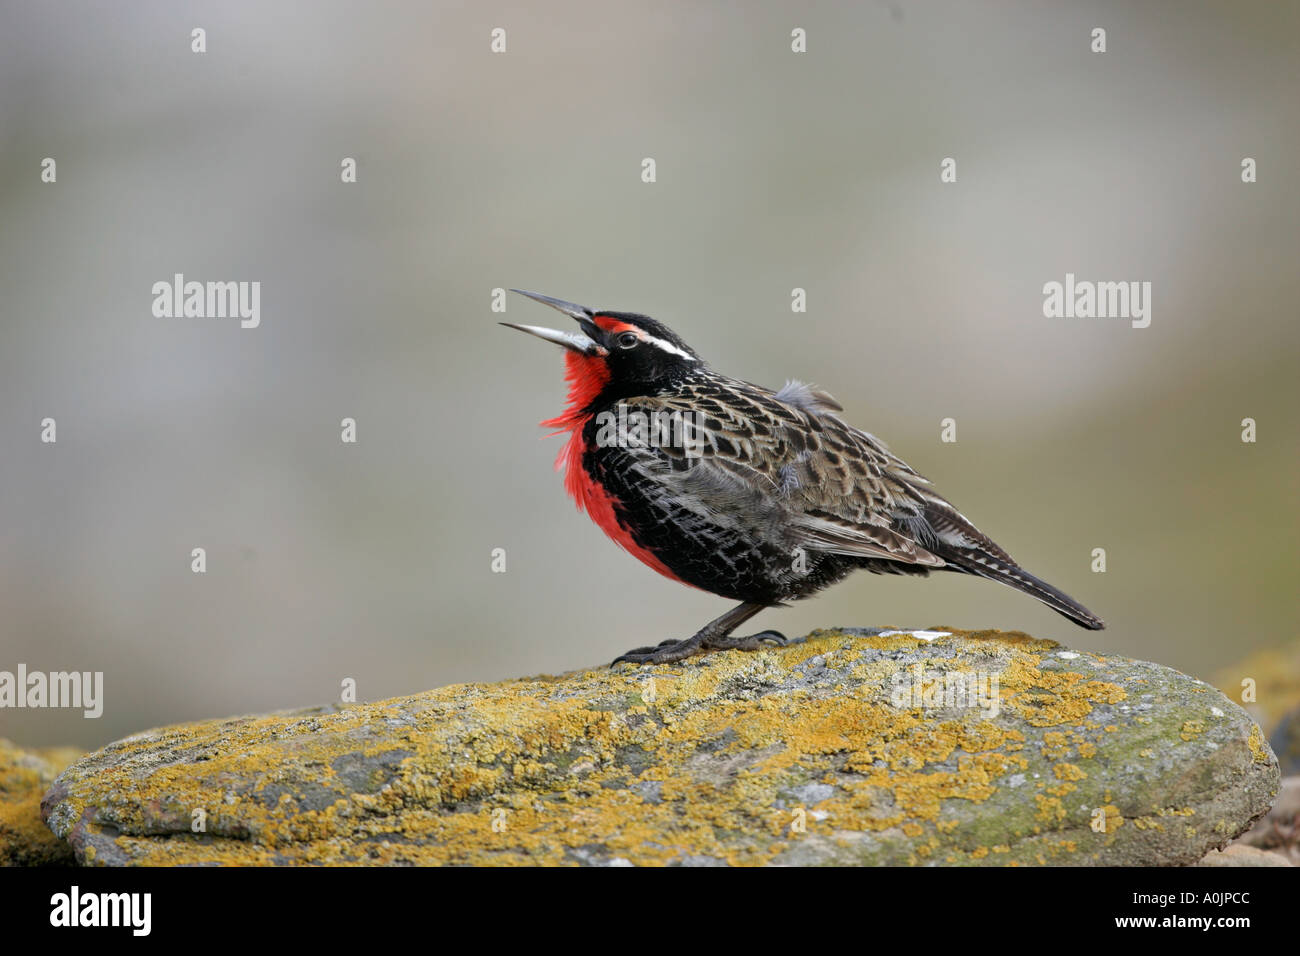 LONG TAILED MEADOW LARK OR MILITARY STARLING Sturnella loyca Stock Photo